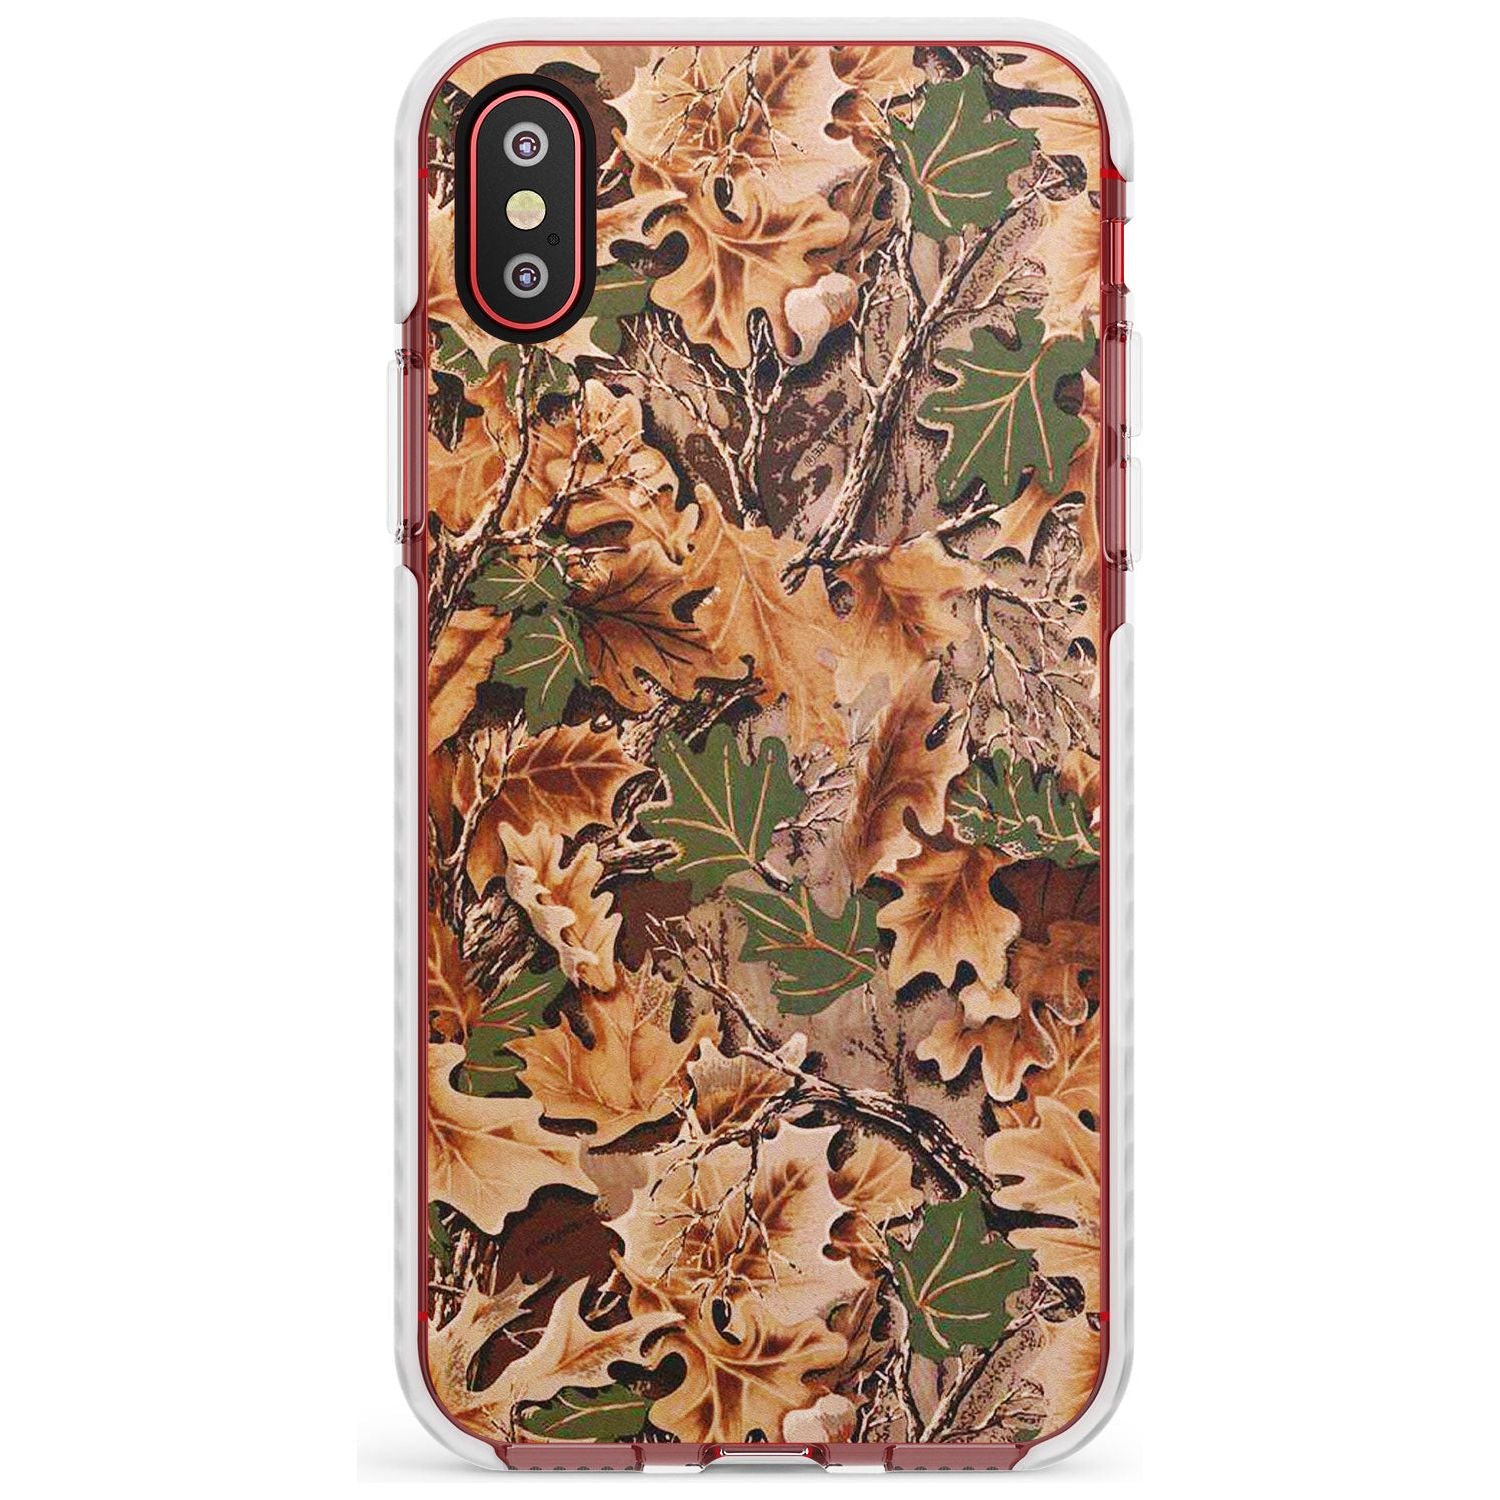 Leaves Camo Impact Phone Case for iPhone X XS Max XR